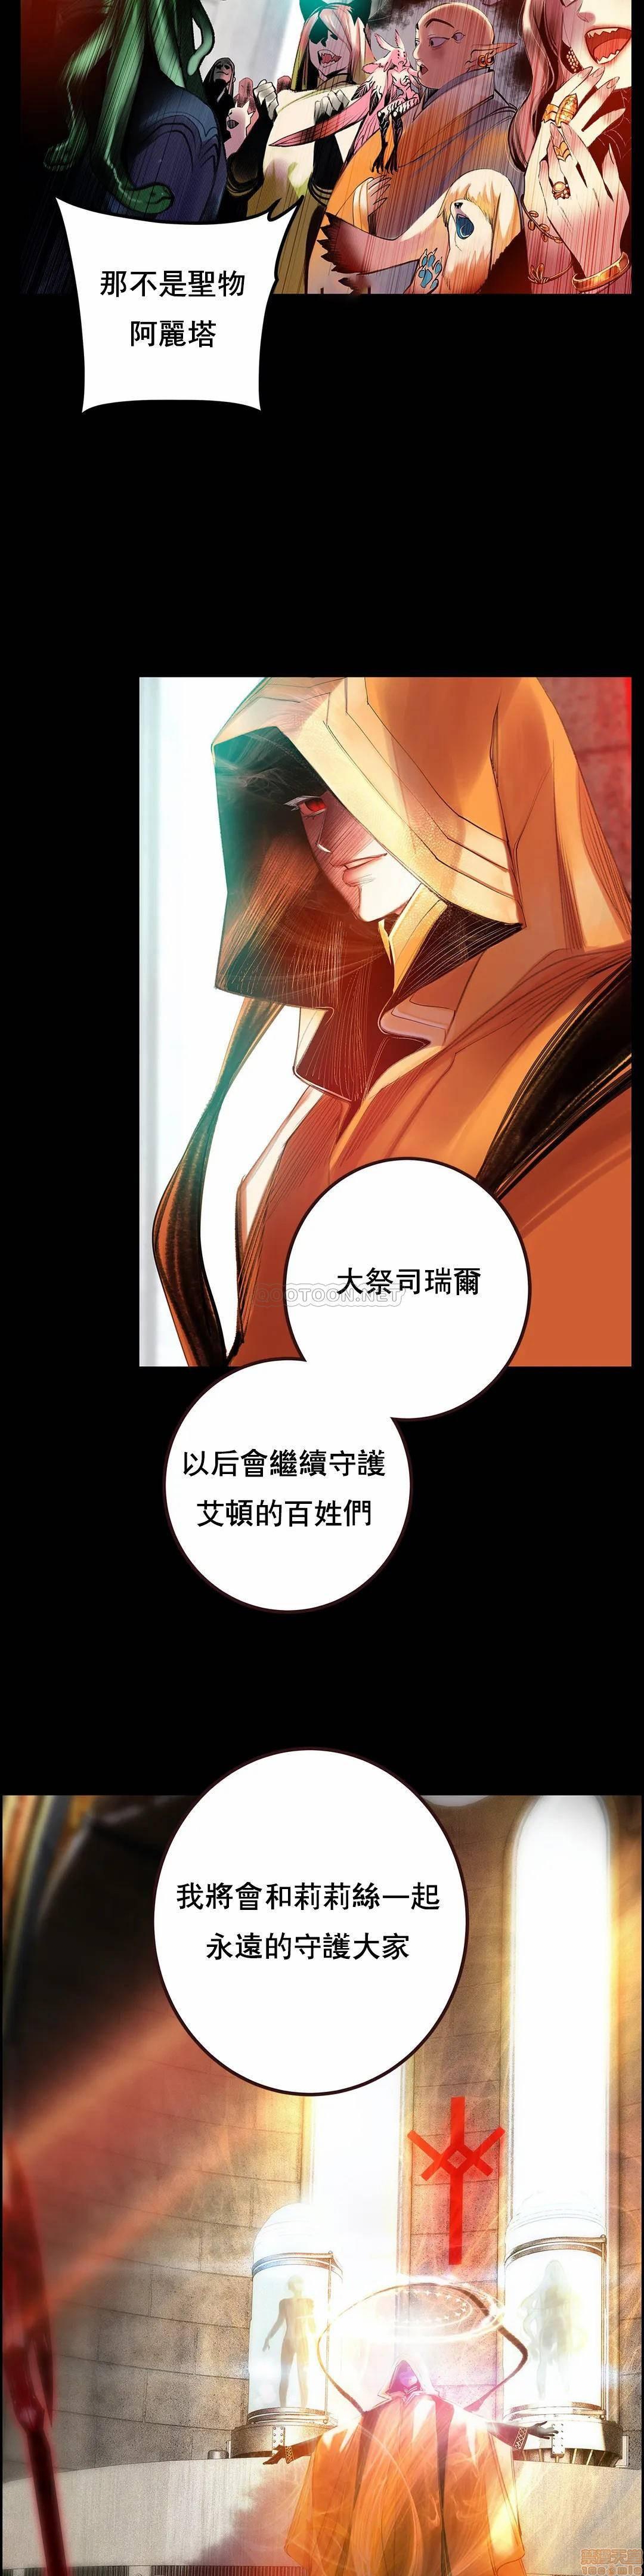 [Juder] Lilith`s Cord (第二季) Ch.77-93 end [Chinese] 253